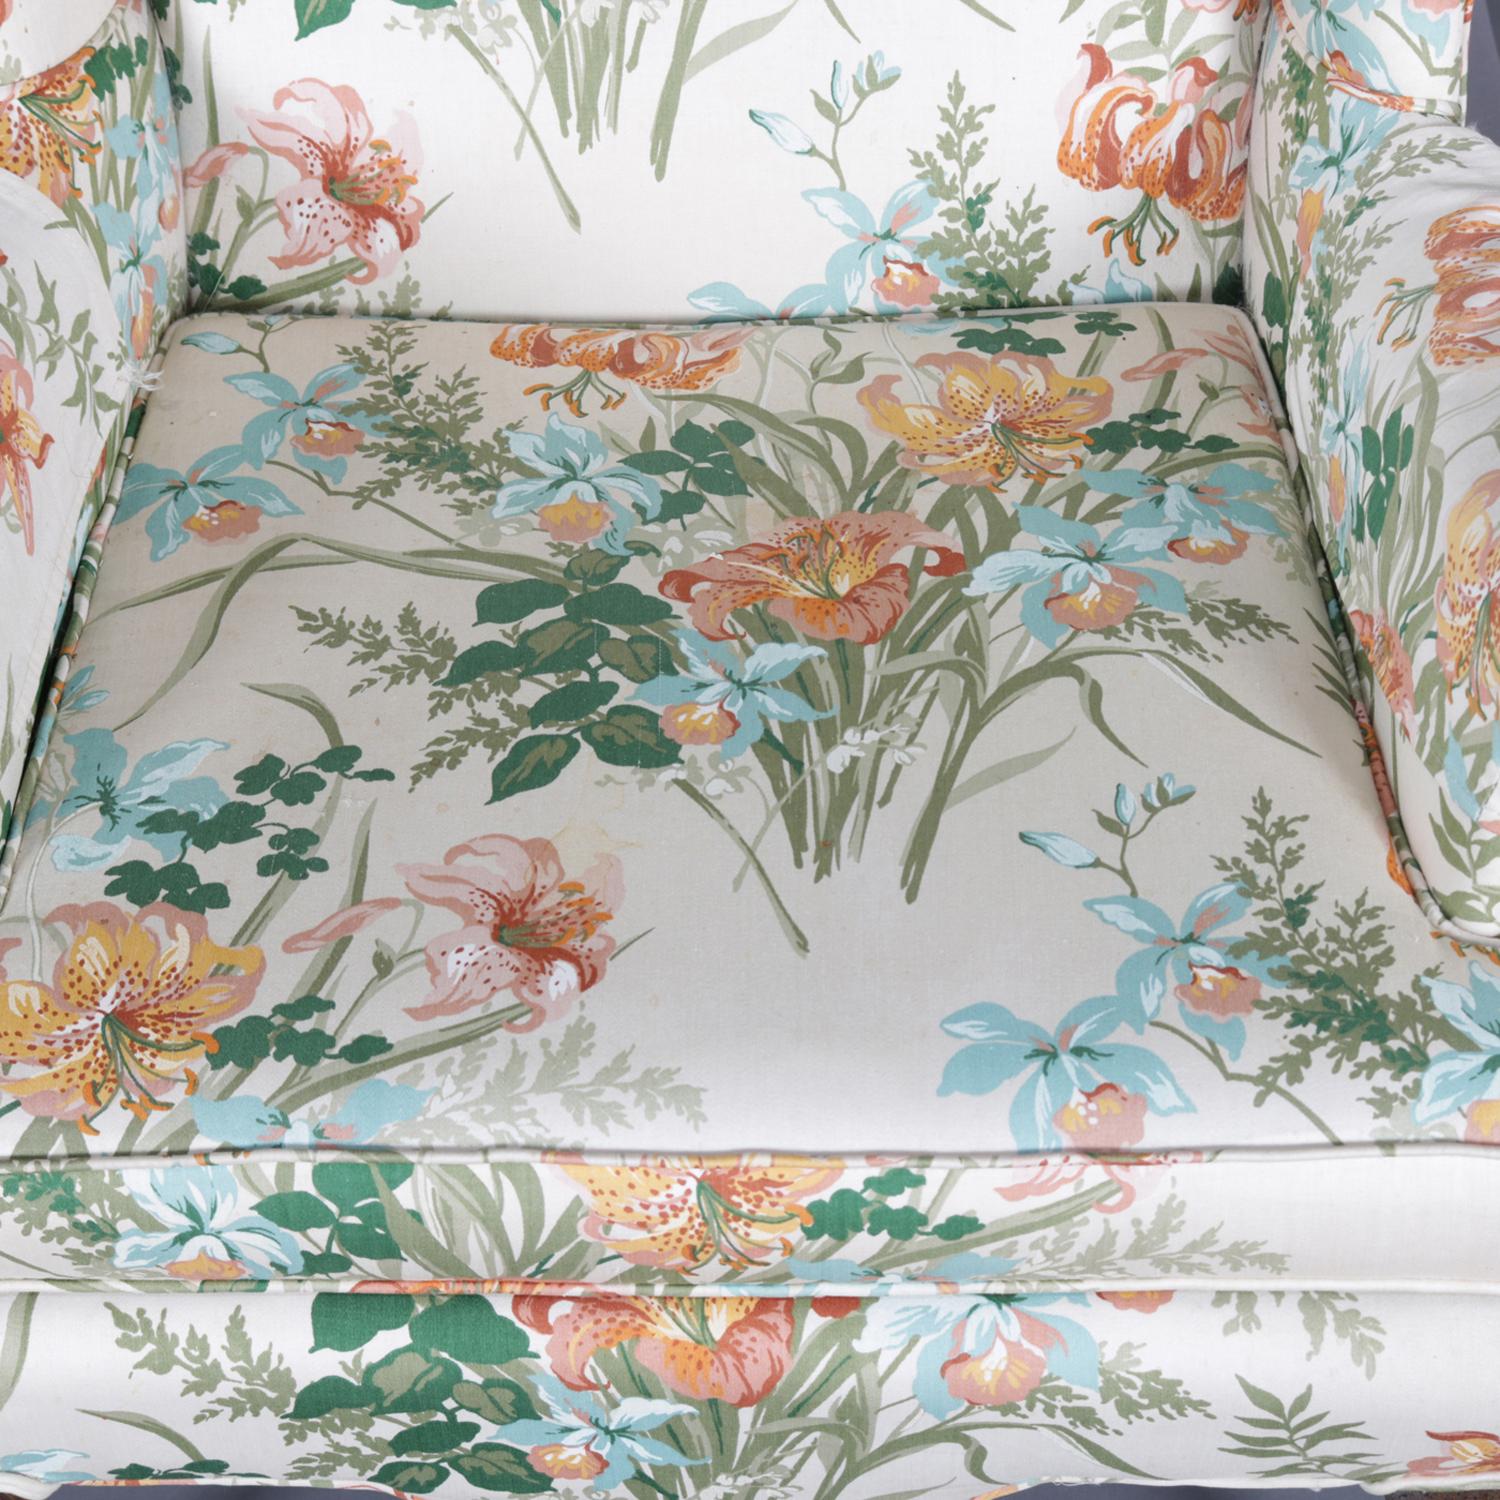 Upholstery Pair of Queen Anne Floral Fireside Wingback Chairs, Tigerlily Print, circa 1930